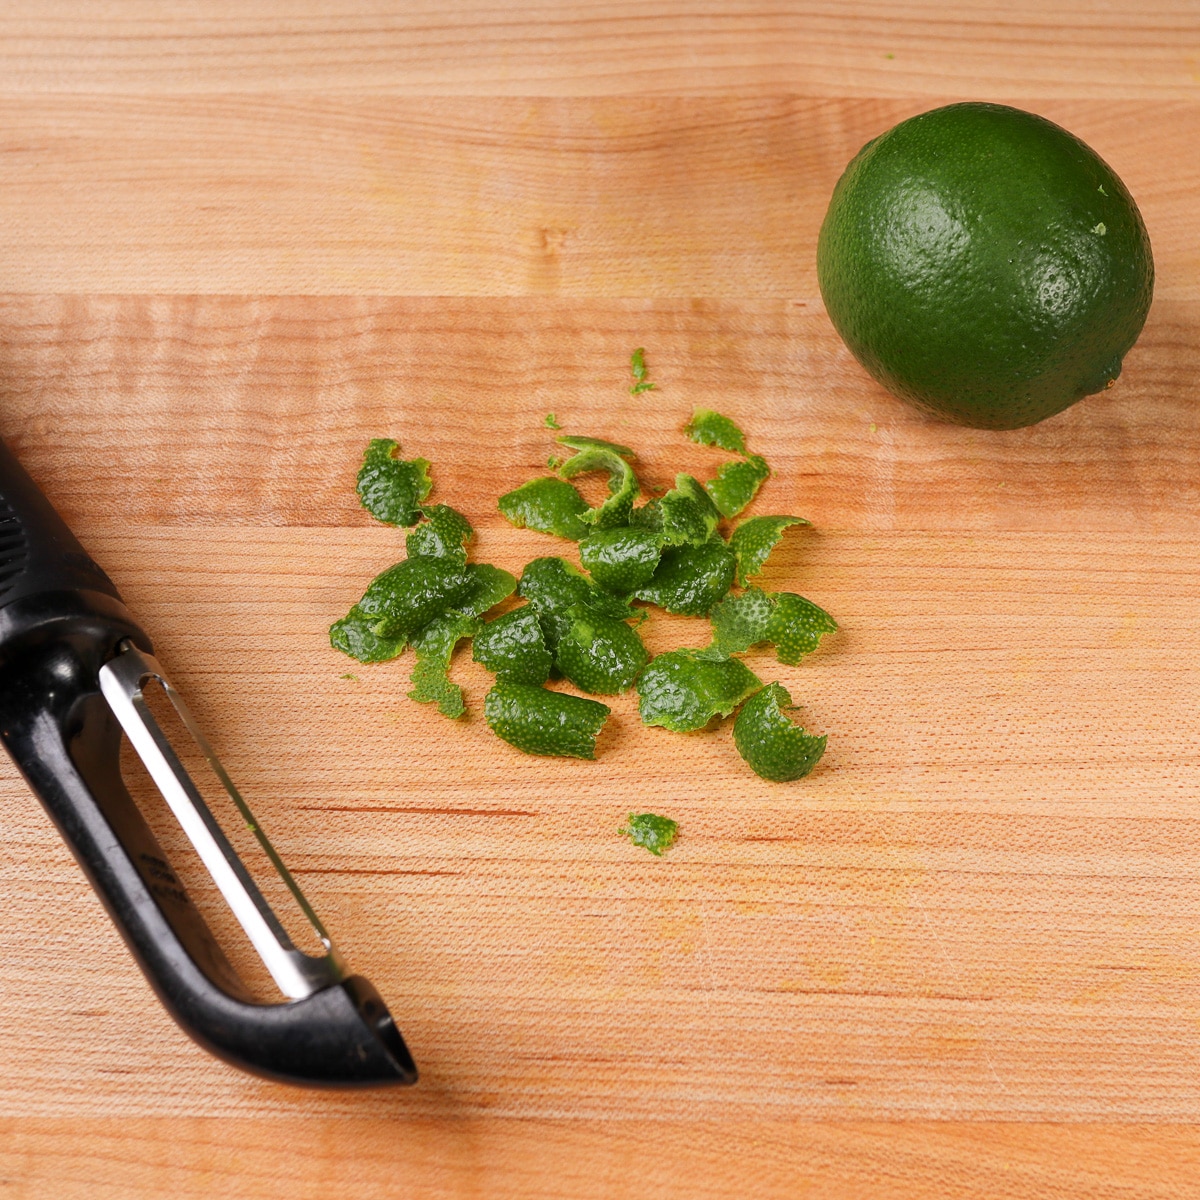 peels of lime from a peeler